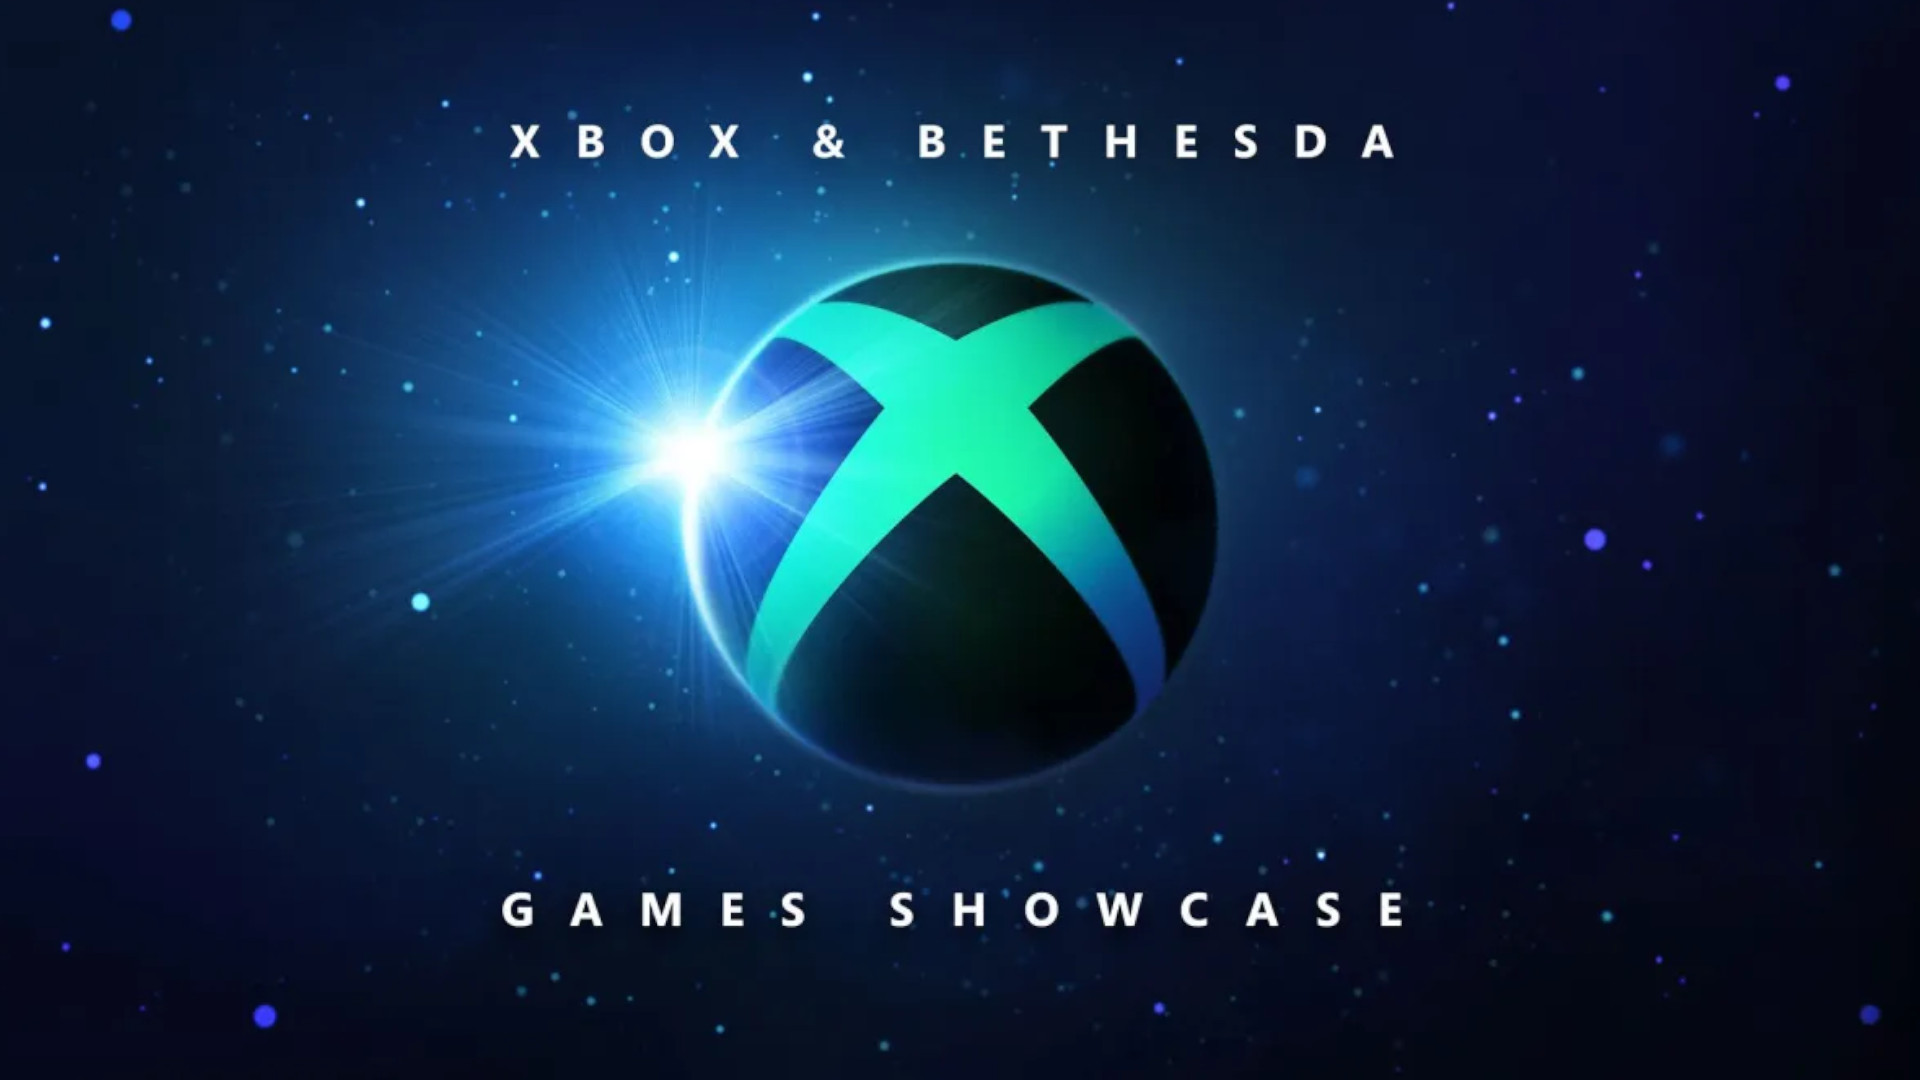 E3 is cancelled, but Xbox's E3 2022 show has a June date